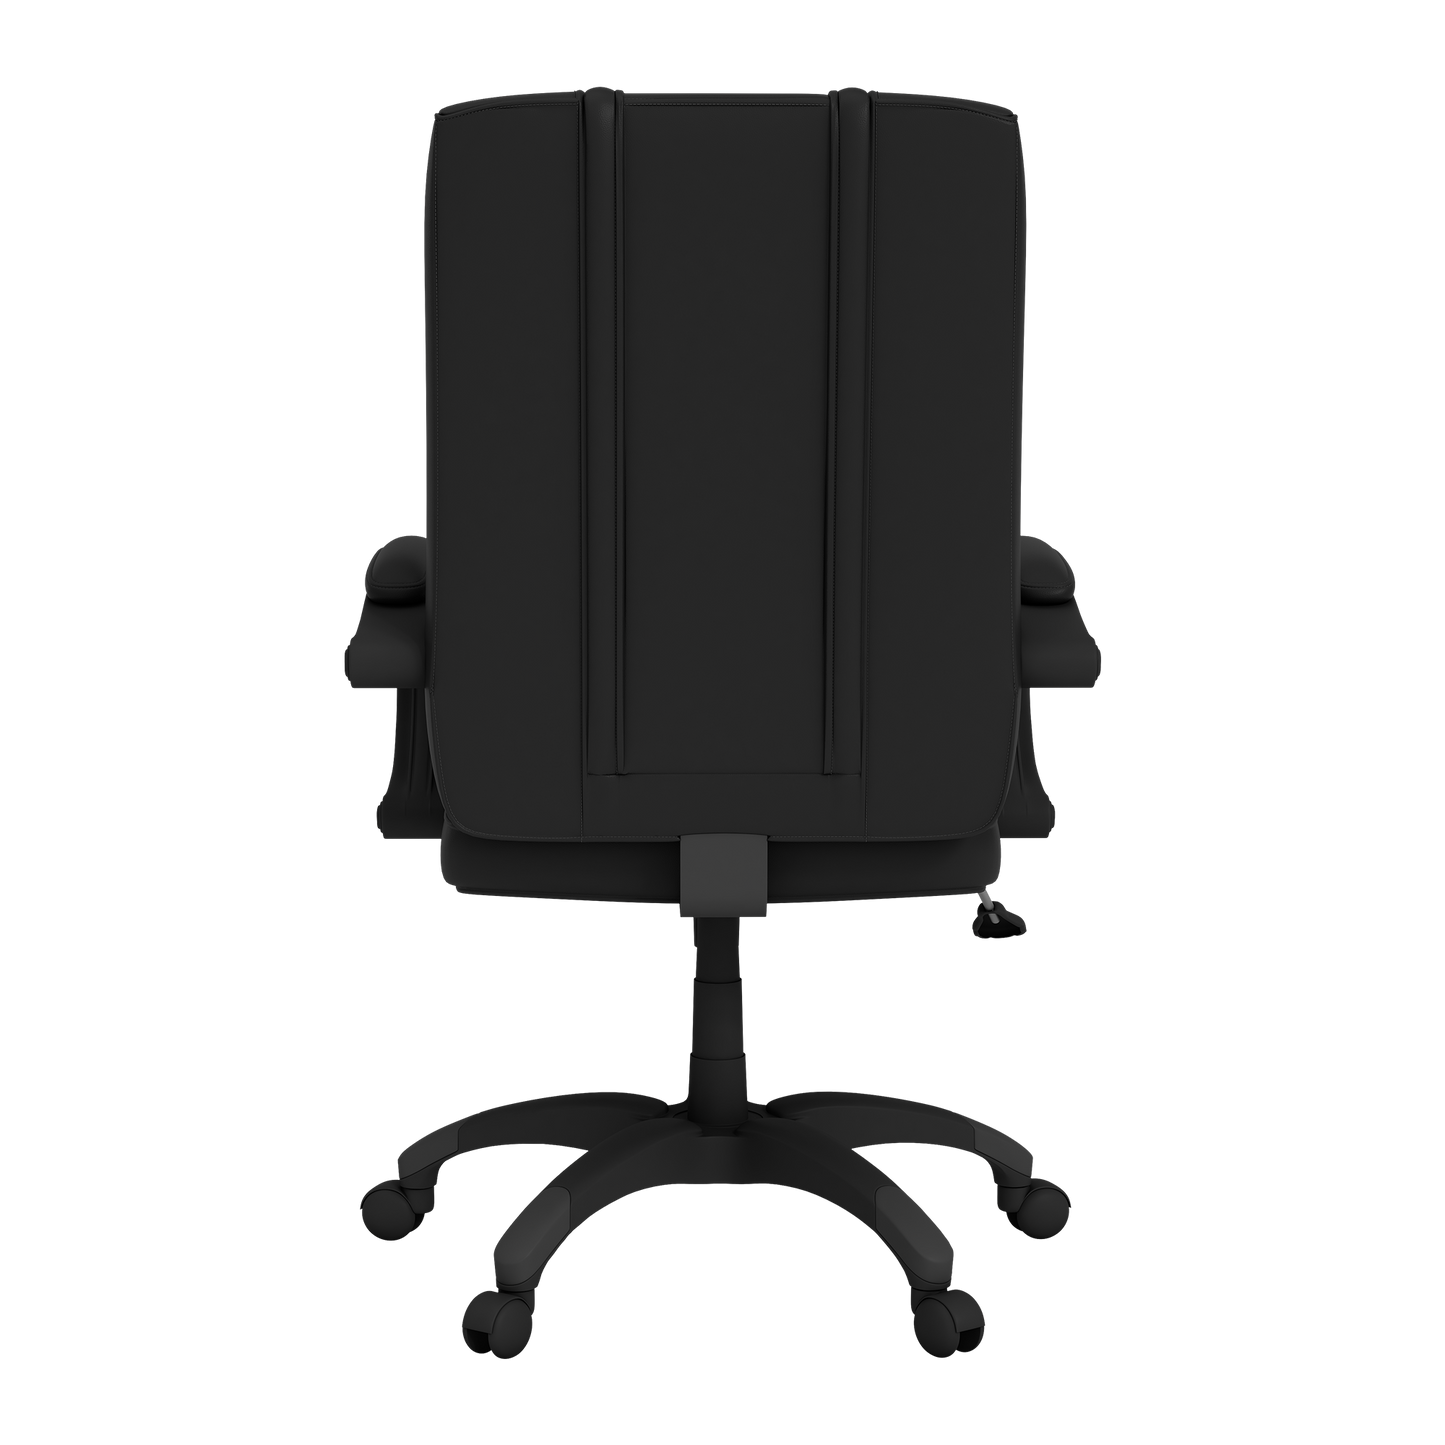 Office Chair 1000 with Knicks Gaming Secondary Logo